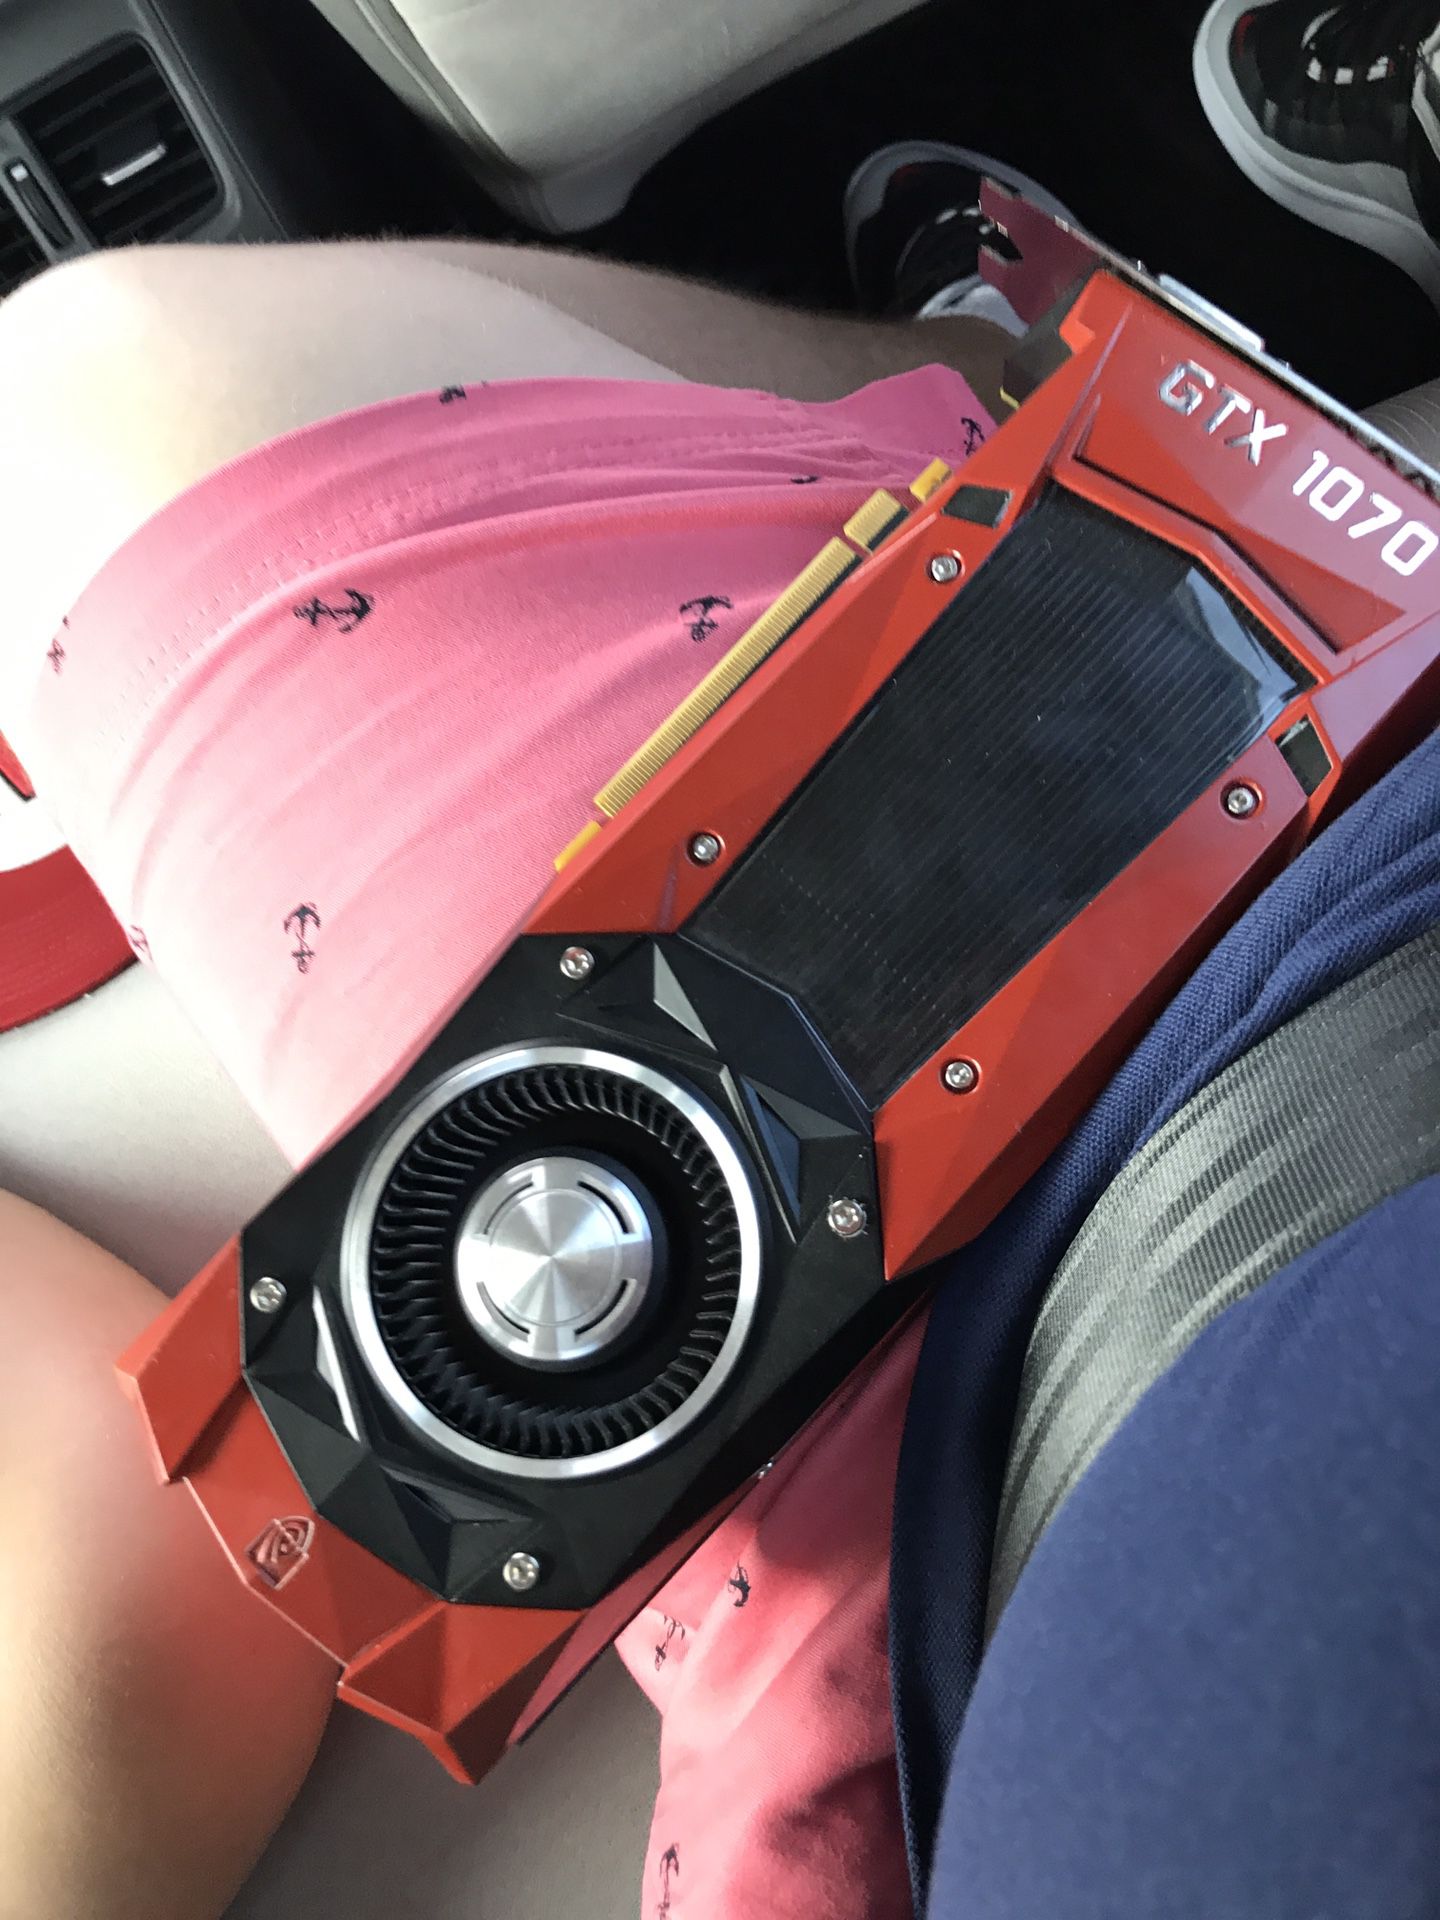 Like new gtx 1070 custom painted and oc/vr ready. 8gb. Only 2 weeks of use. Will negotiate